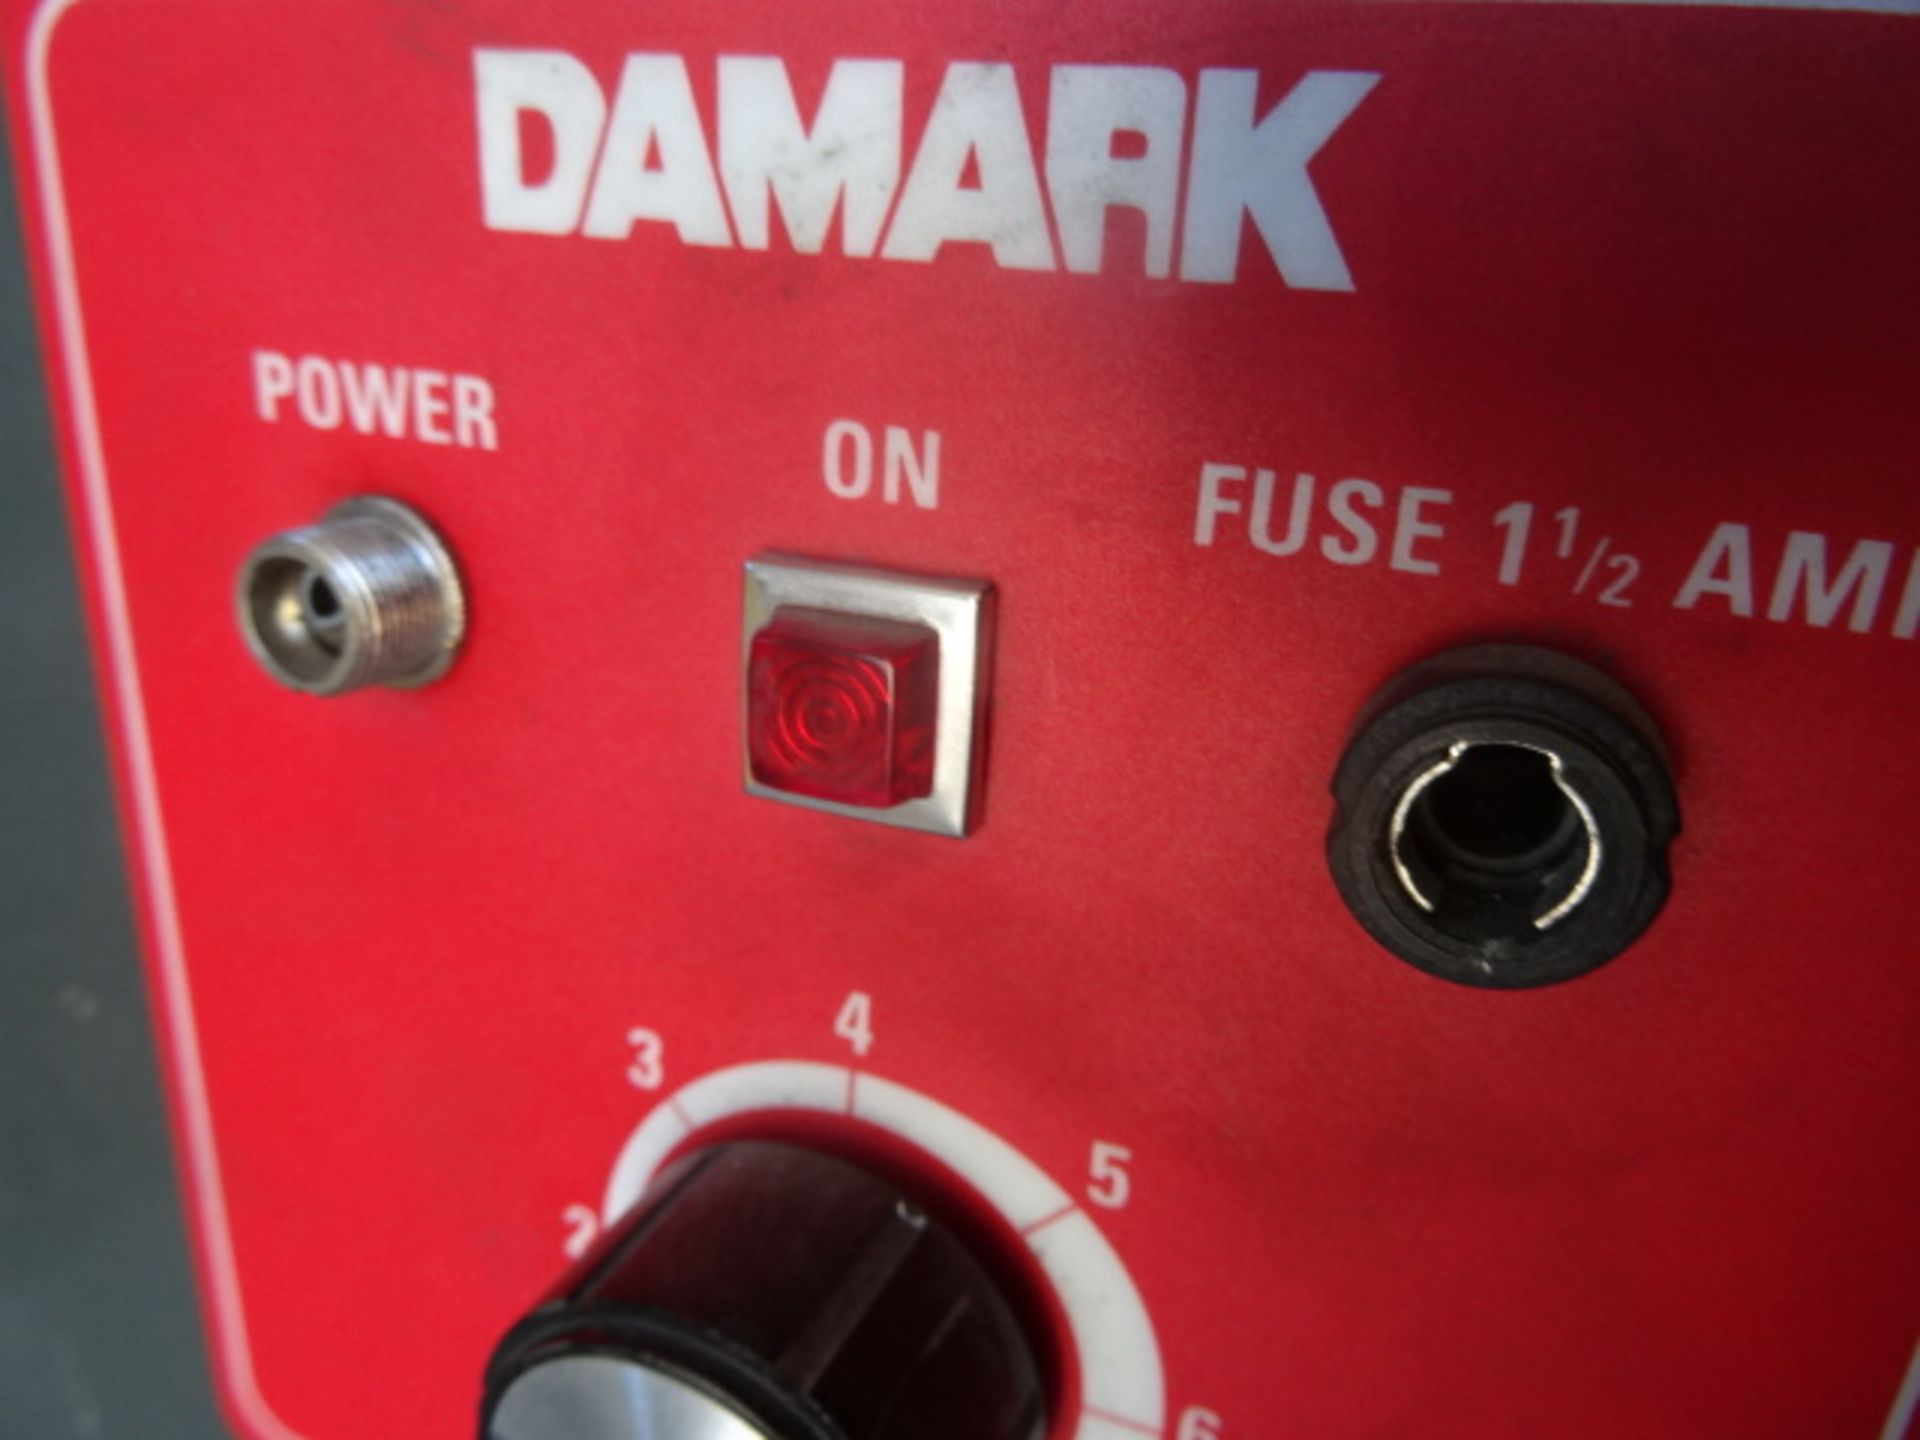 1x, Damark PFF26 Power Film Feeder AS IS Missing Power switch & Fuse - Image 5 of 6